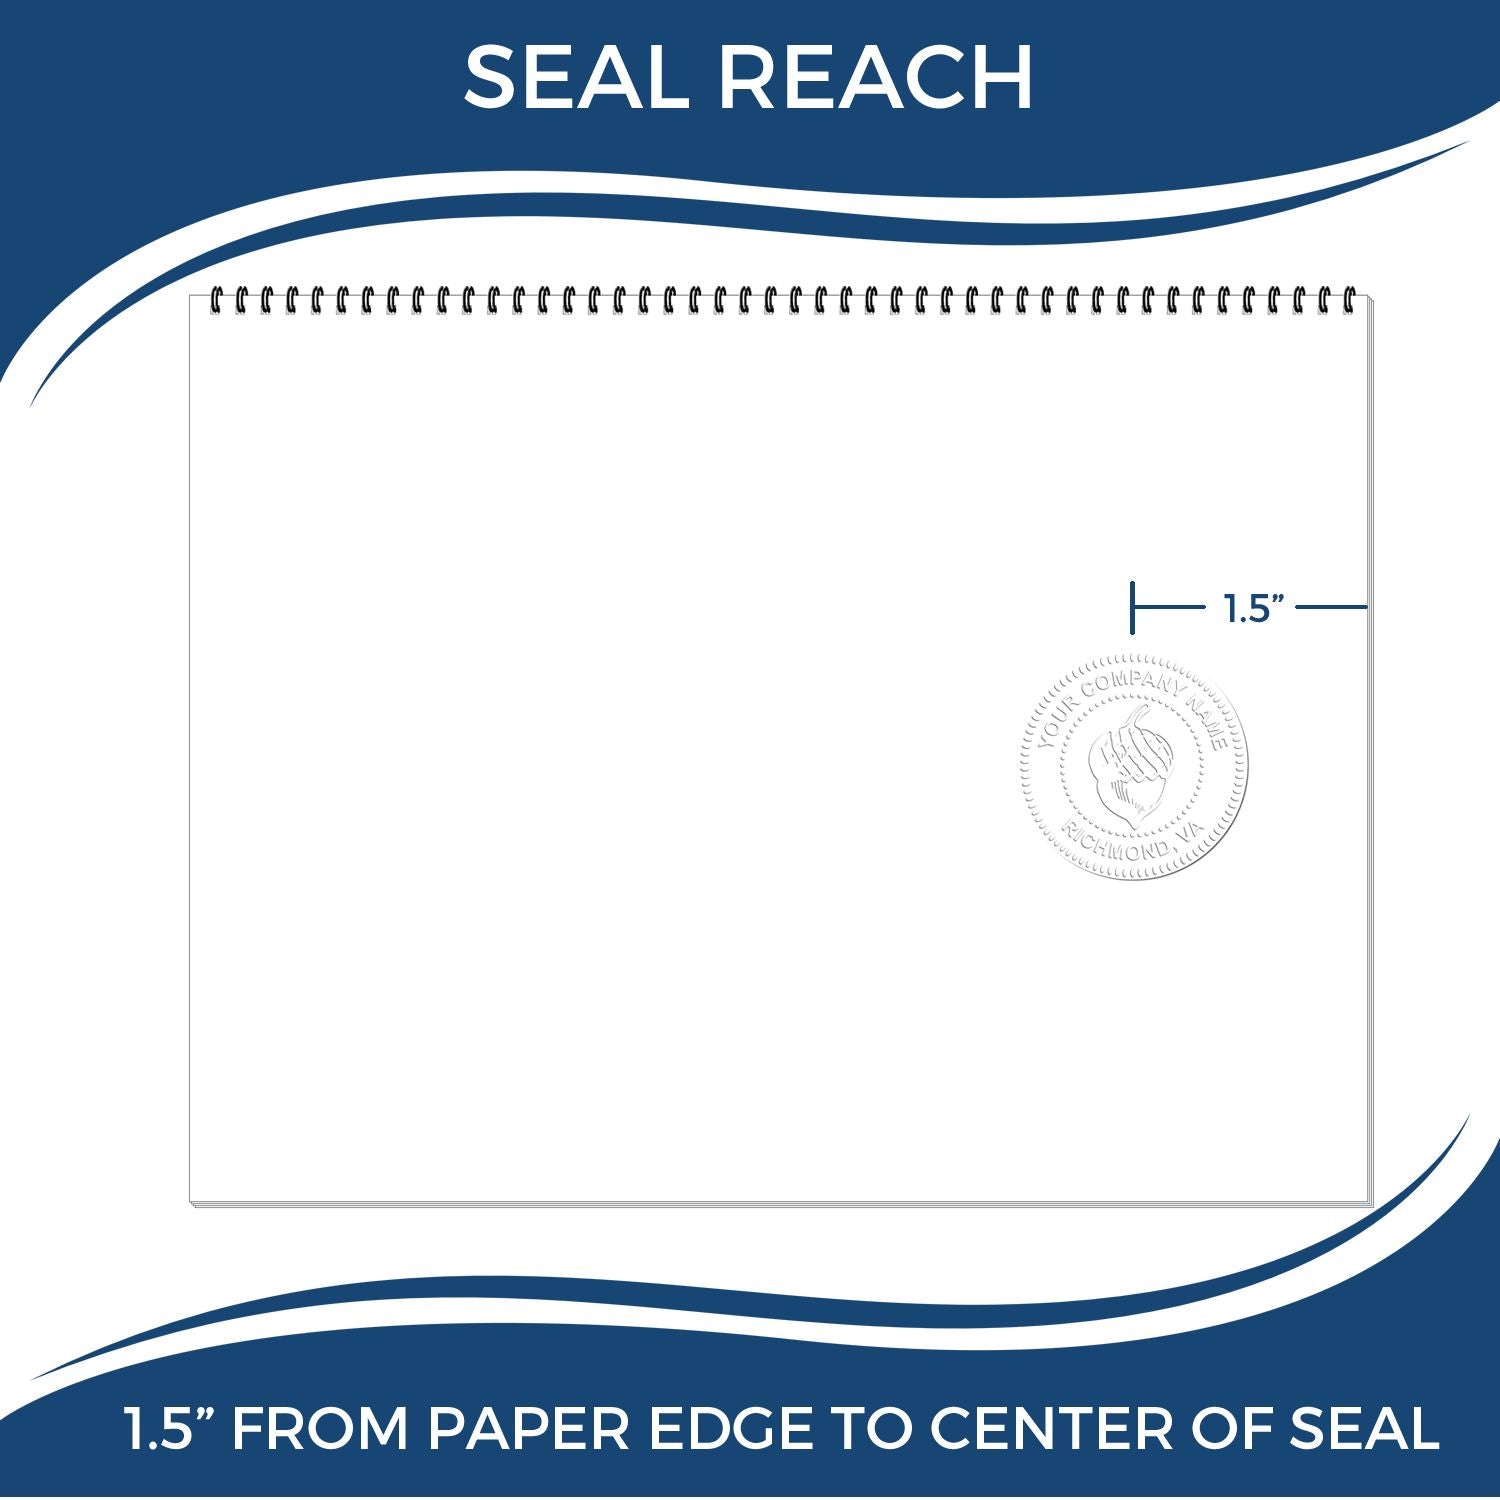 An infographic showing the seal reach which is represented by a ruler and a miniature seal image of the Handheld Tennessee Land Surveyor Seal